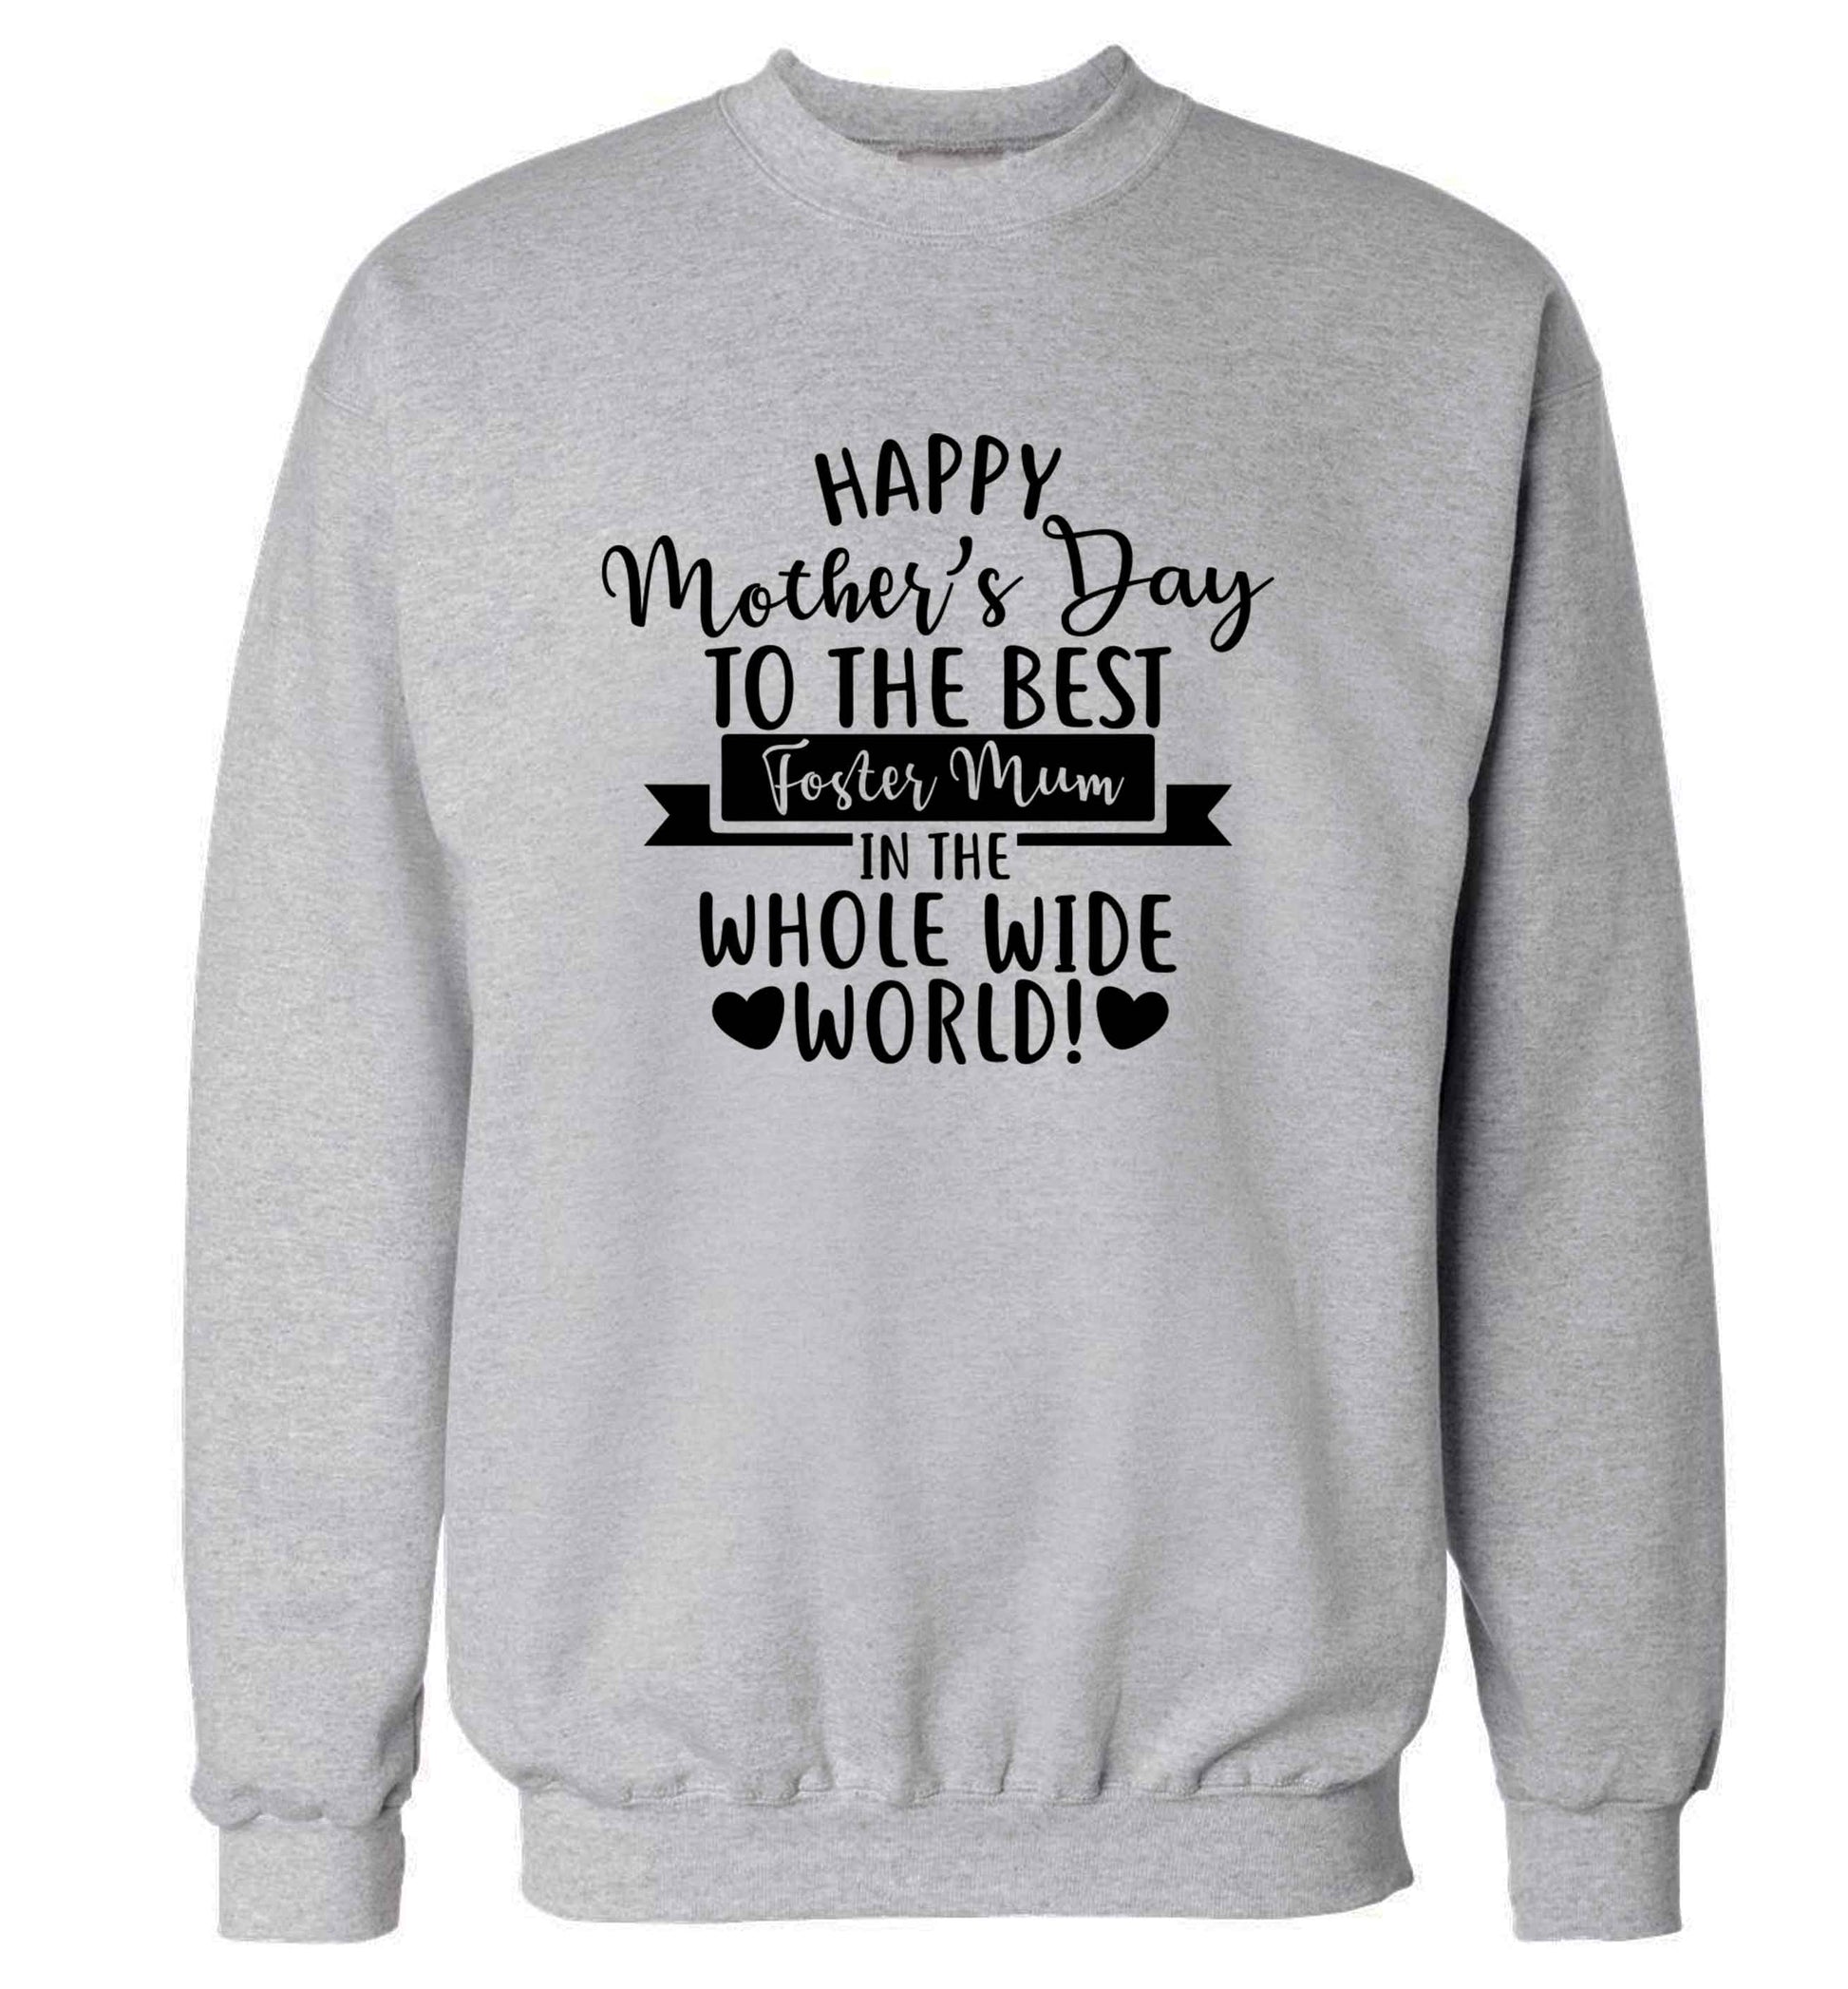 Happy mother's day to the best foster mum in the world adult's unisex grey sweater 2XL